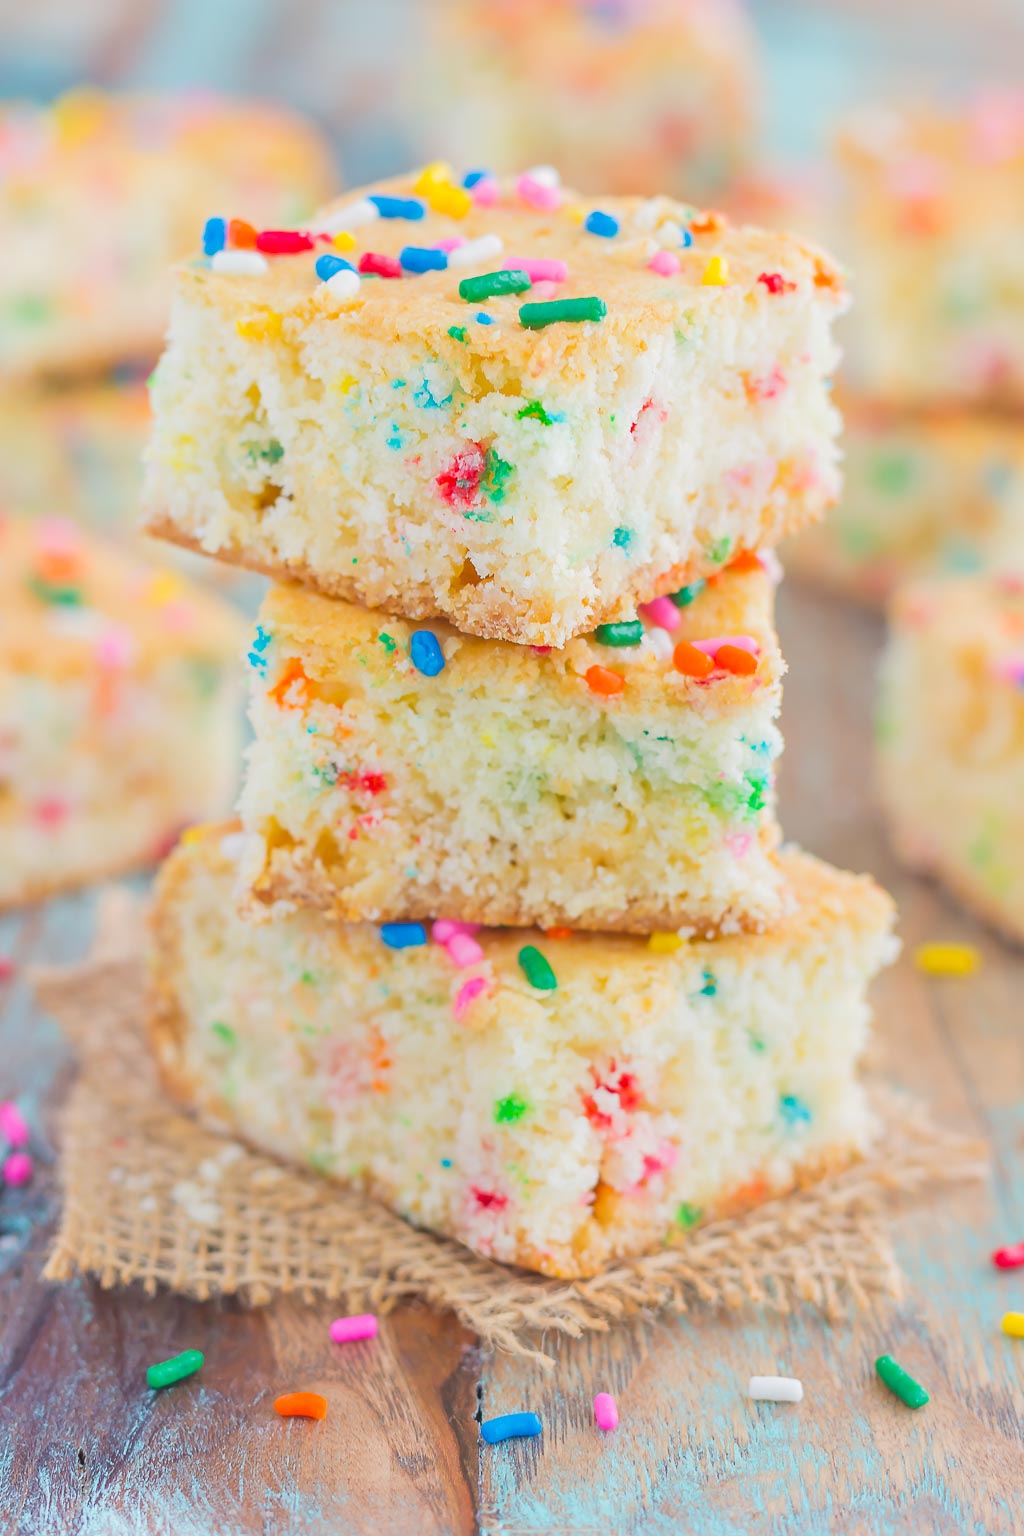 Soft, moist, and full of cake batter flavor, these Funfetti Cake Batter Bars are sure to satisfy your sweet tooth in a fun way!